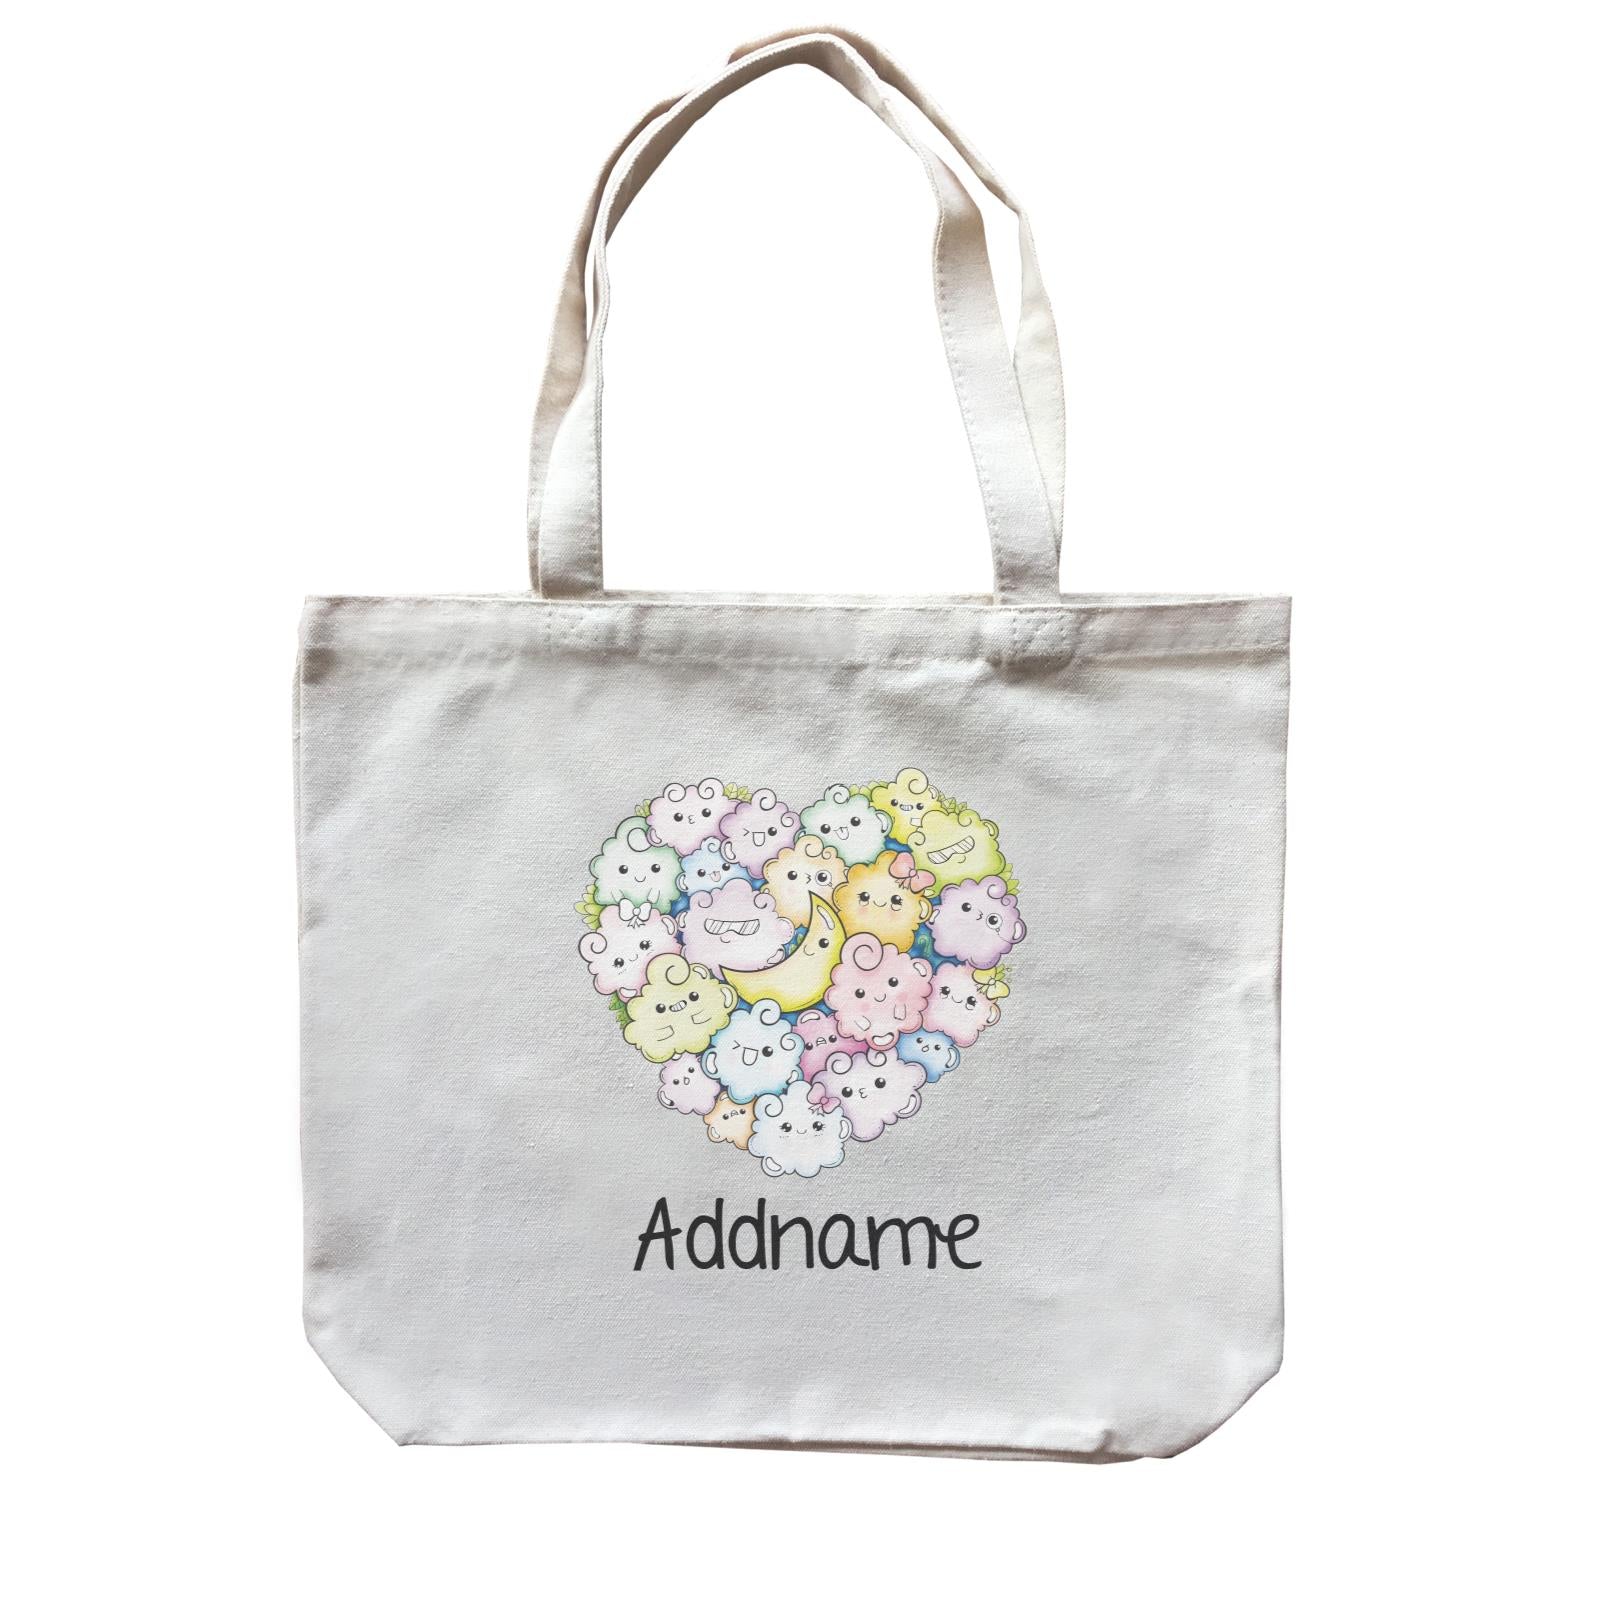 Cute Animals And Friends Series Cute Little Cloud Group Heart Addname Canvas Bag